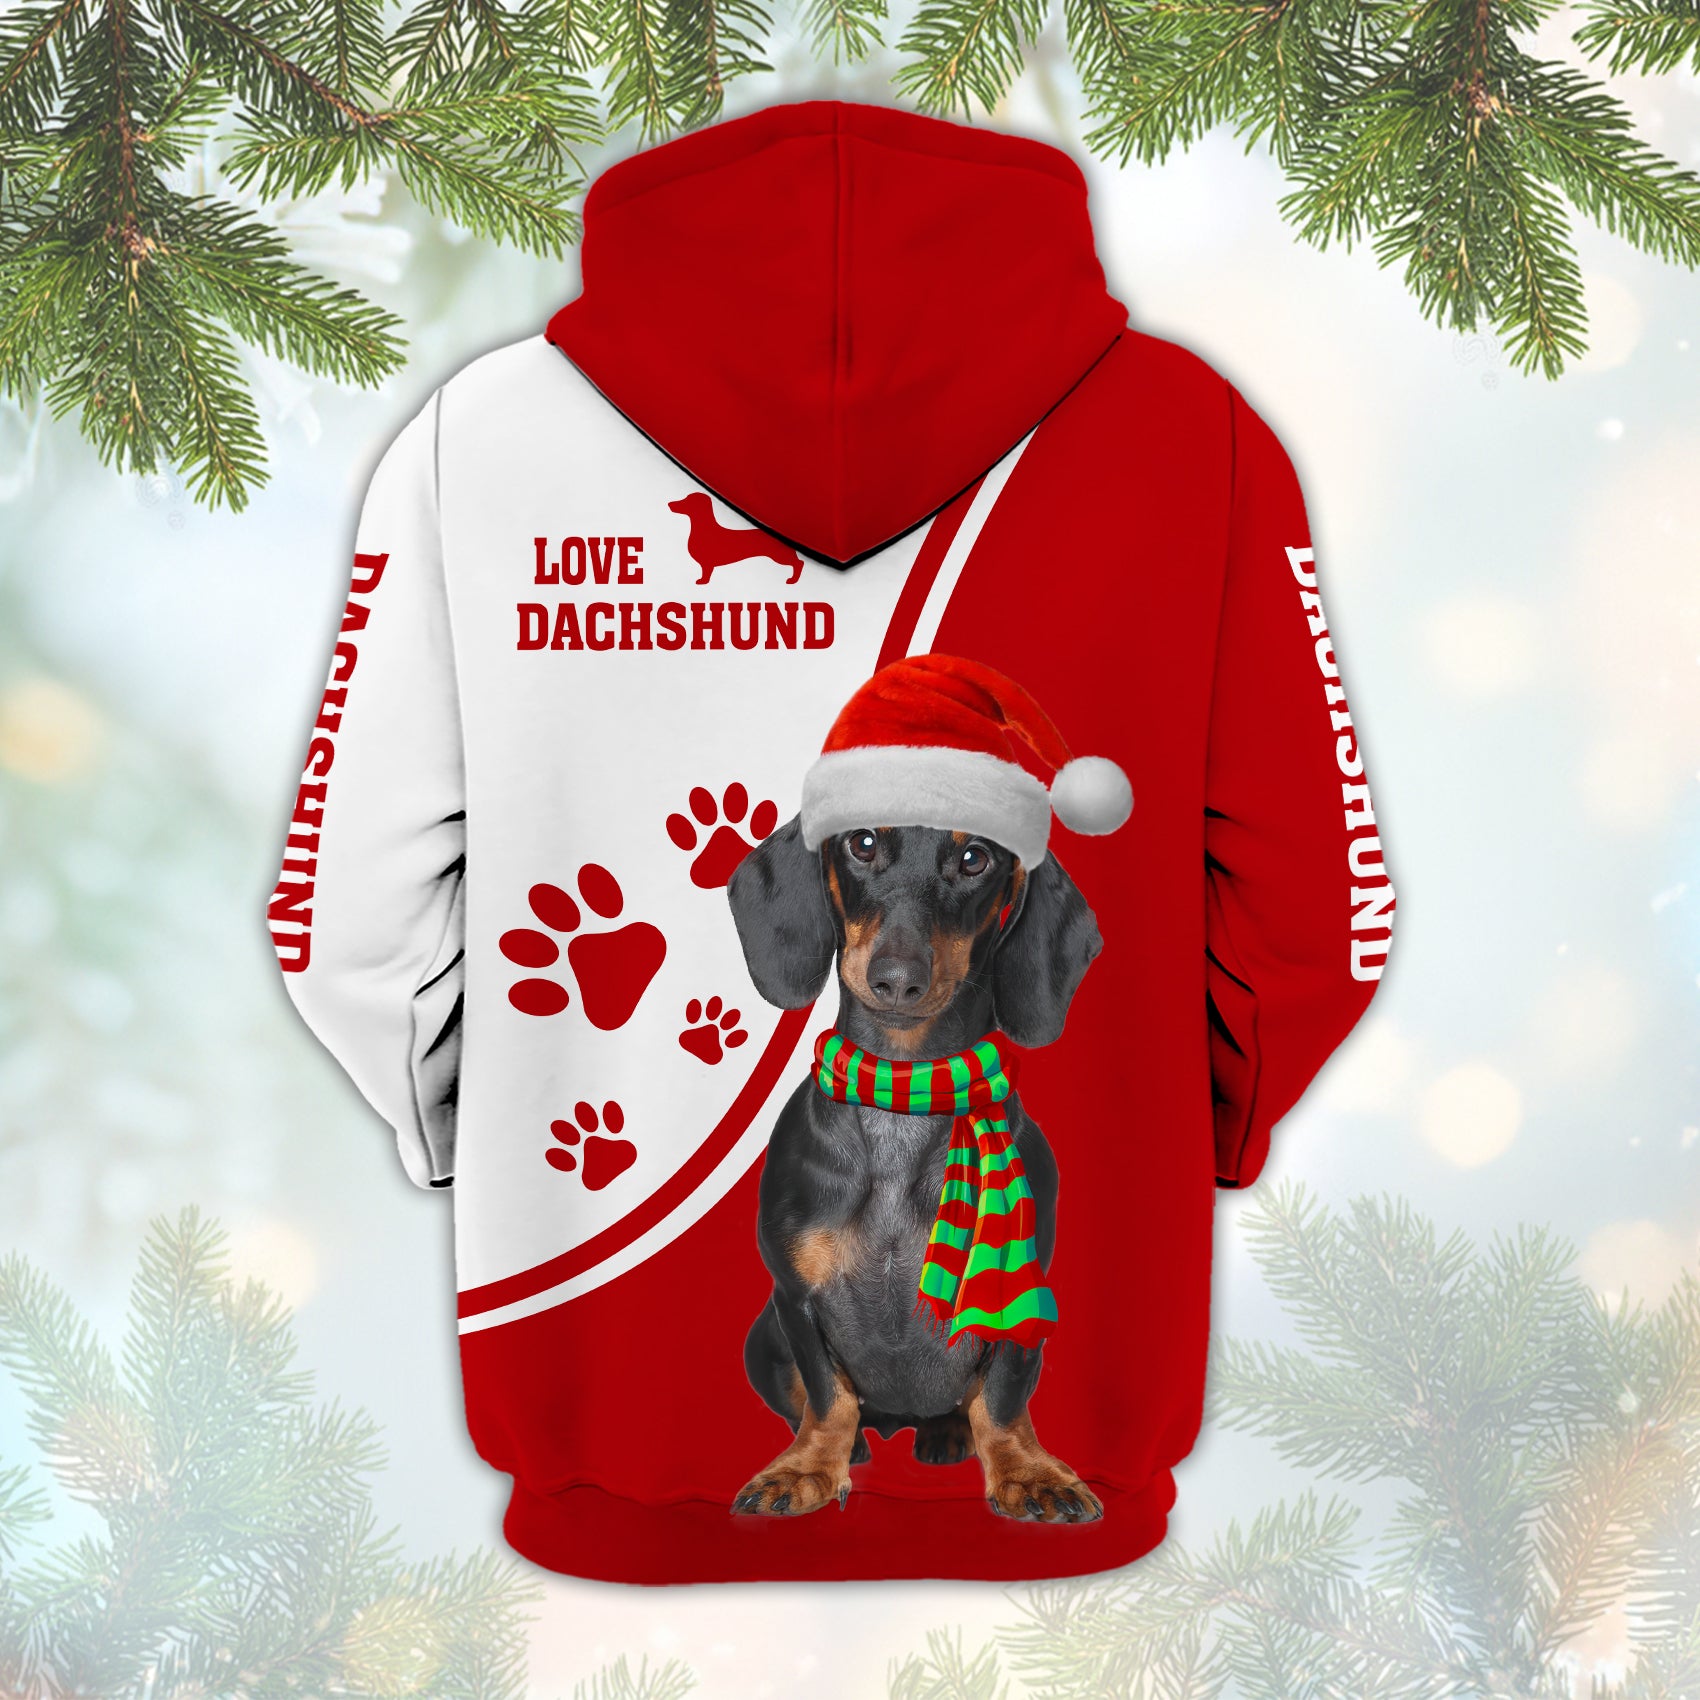 Kisses Fix EveryThing Dachshund - Personalized Name 3D Zipper Hoodie - Ntp-542